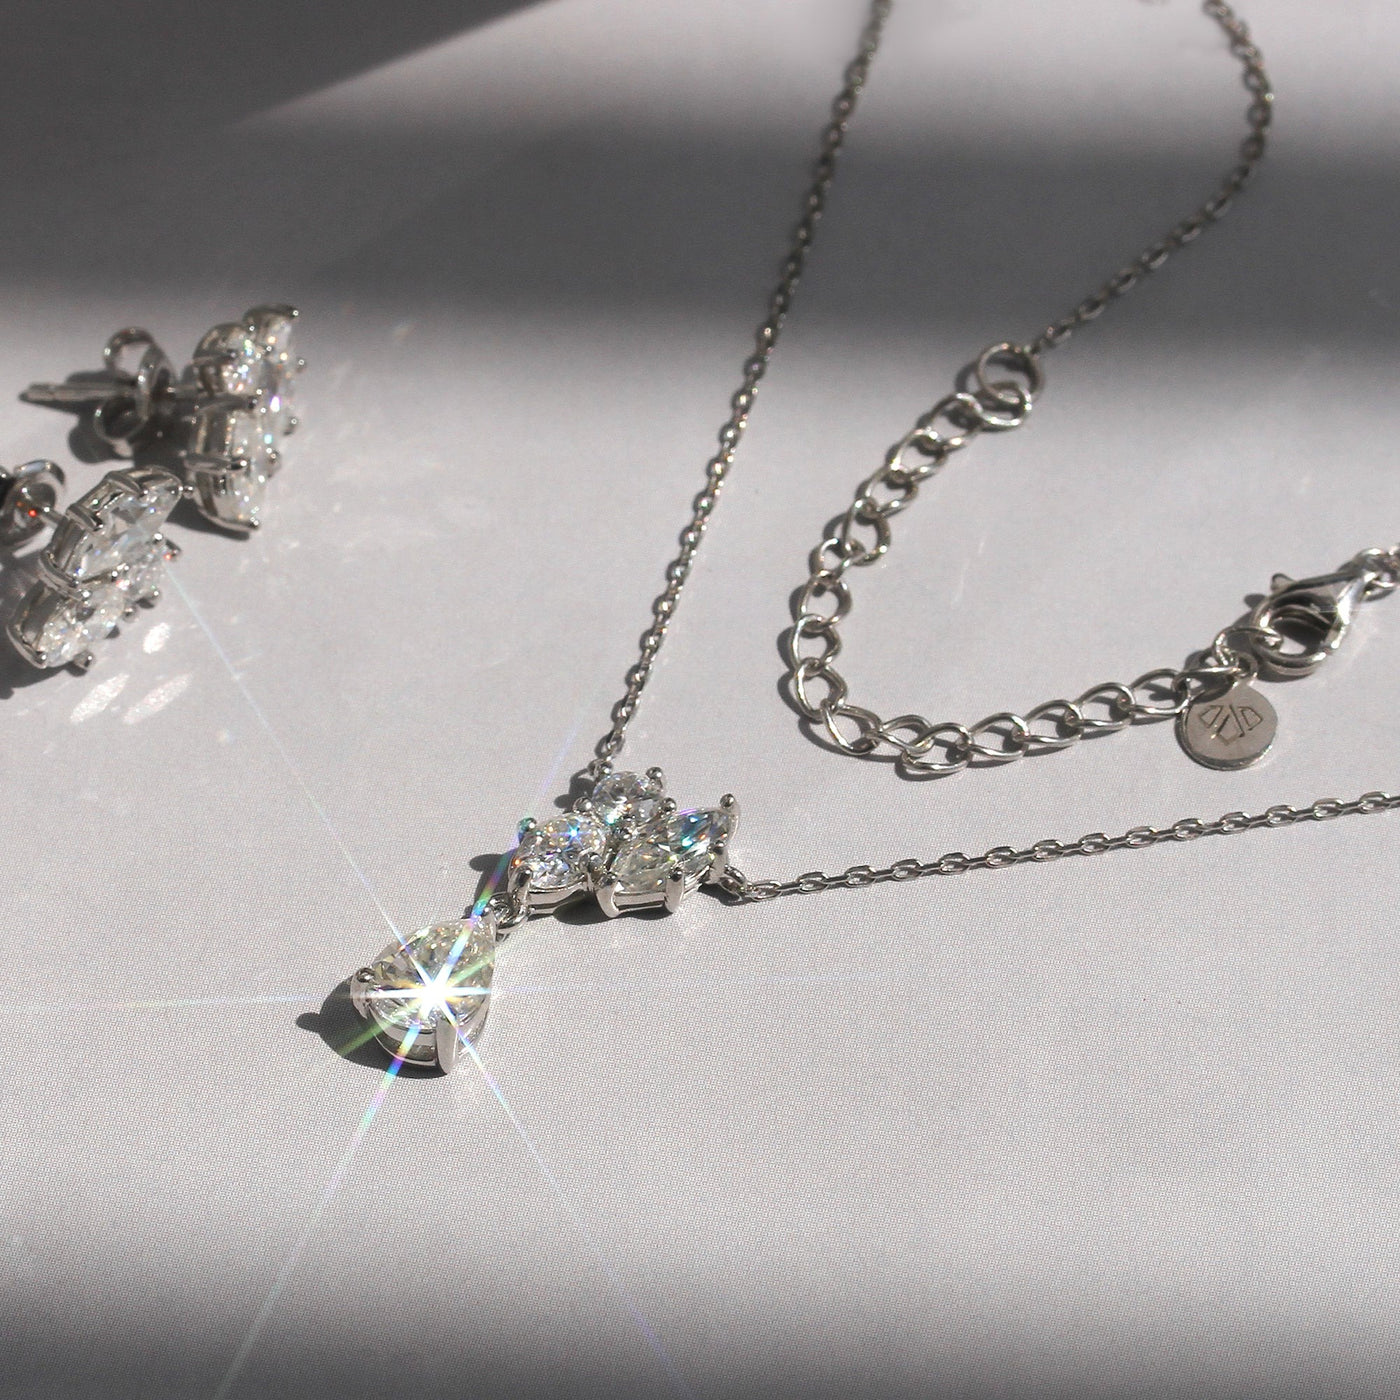 Moissanite Dewdrop Brilliance Earrings & Necklace